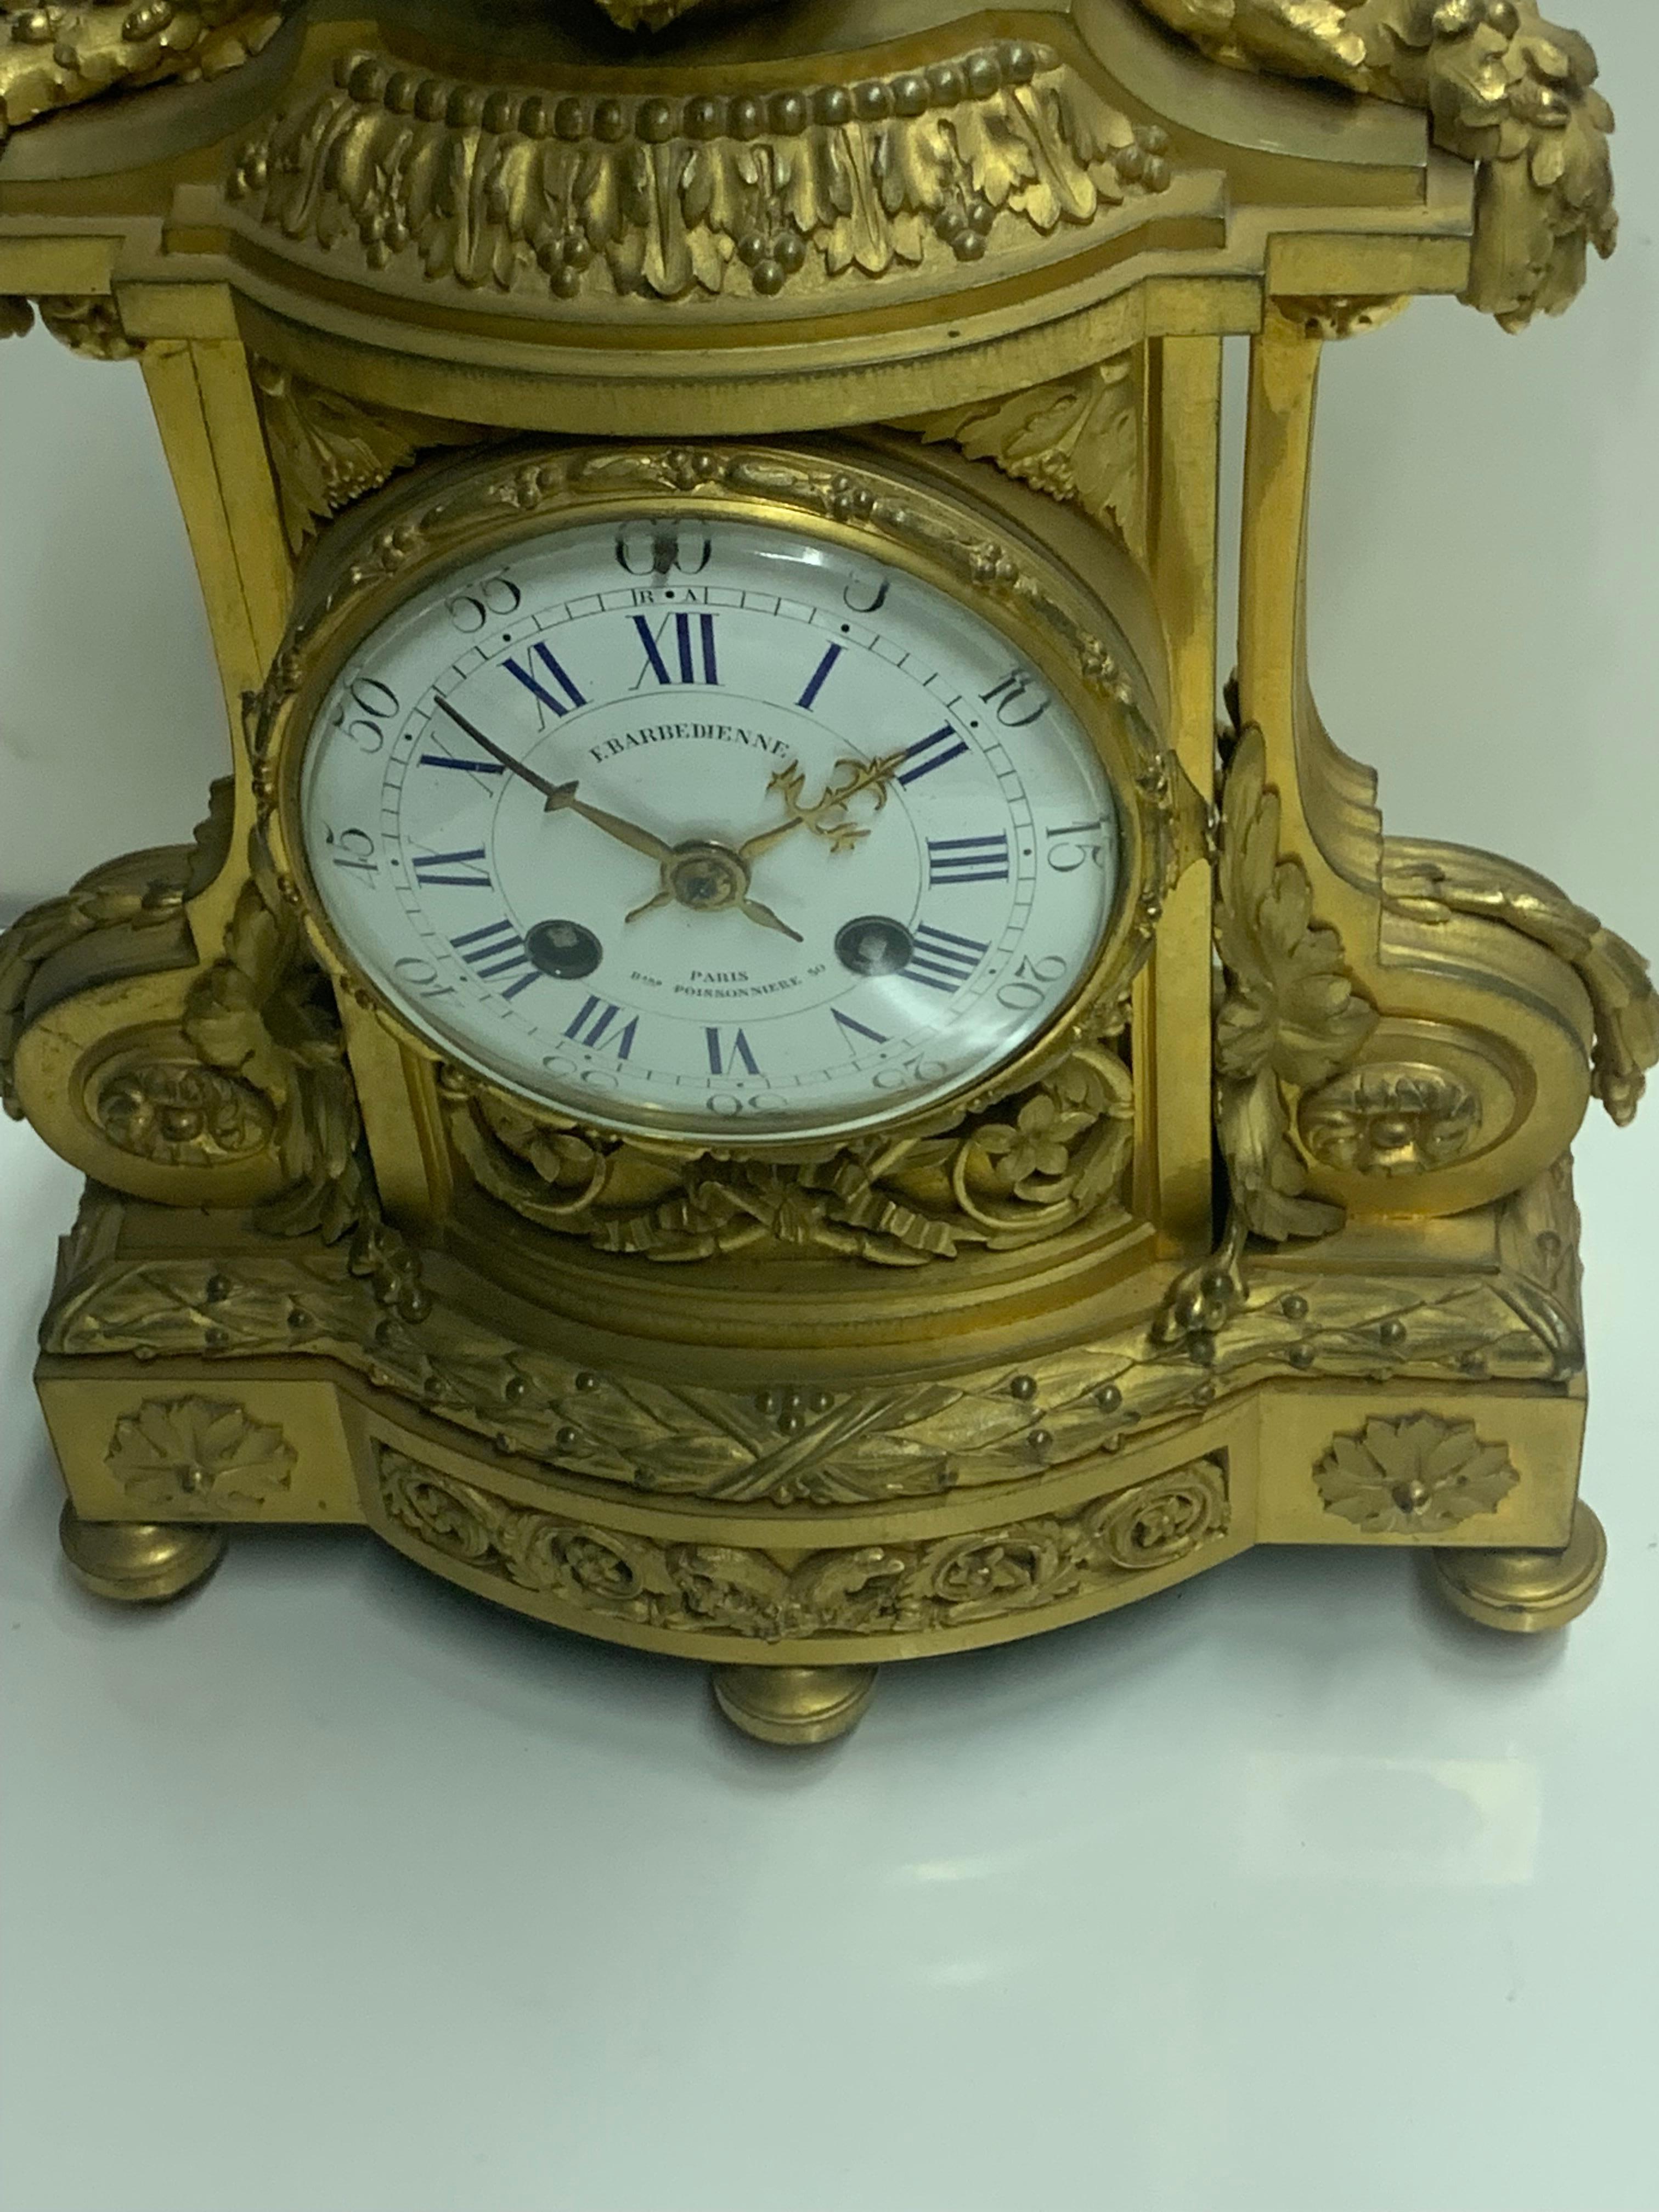 A very nice  clock in bronze made by  F.BARBEDIENNE louis XVI style of very high quality
the dial of the clock is in enamel, and its remarkably executed by one the best bronziers of this parisian period